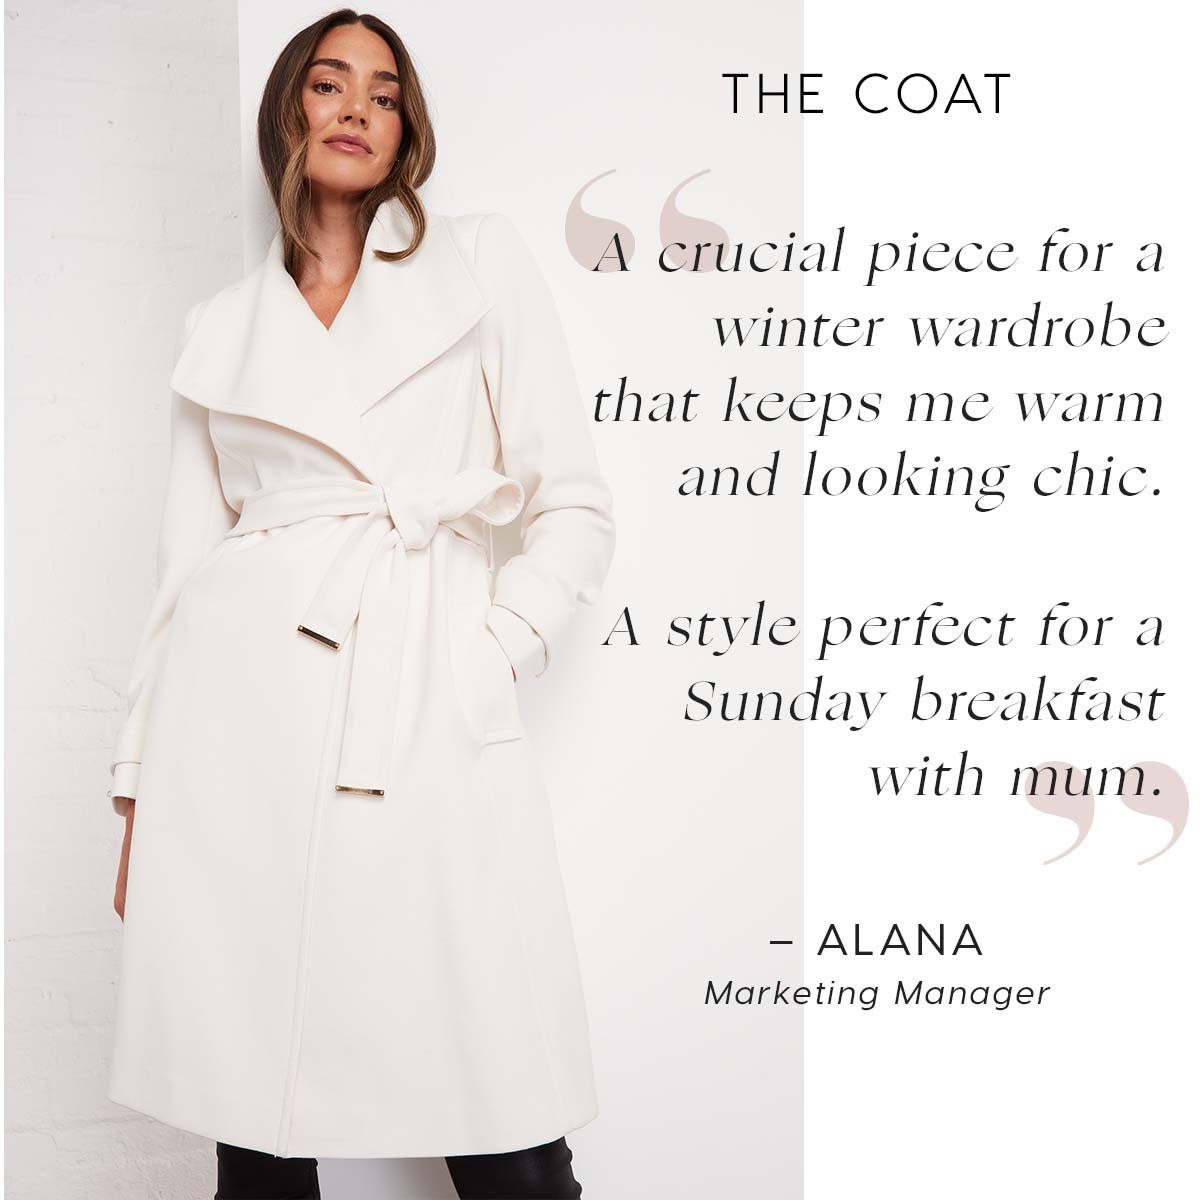 The Coat. A crucial piece for a winter wardrobe that keeps me warm and looking chic.  A style perfect for a Sunday breakfast with mum.